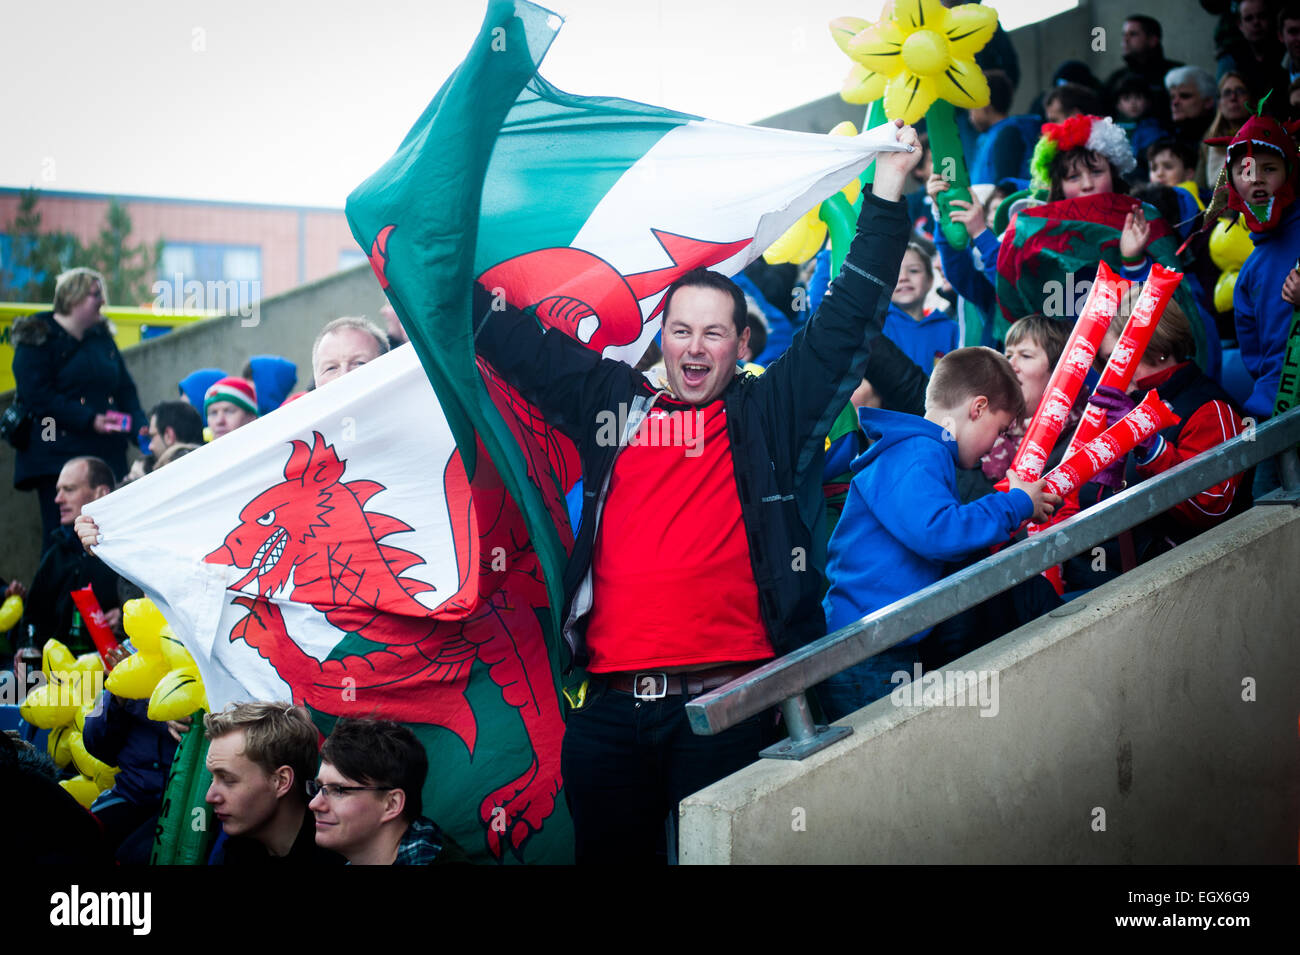 London Welsh rugby supporters celebrating on Saint David's Day (March 1st 2015) and waving inflatable daffodils Stock Photo